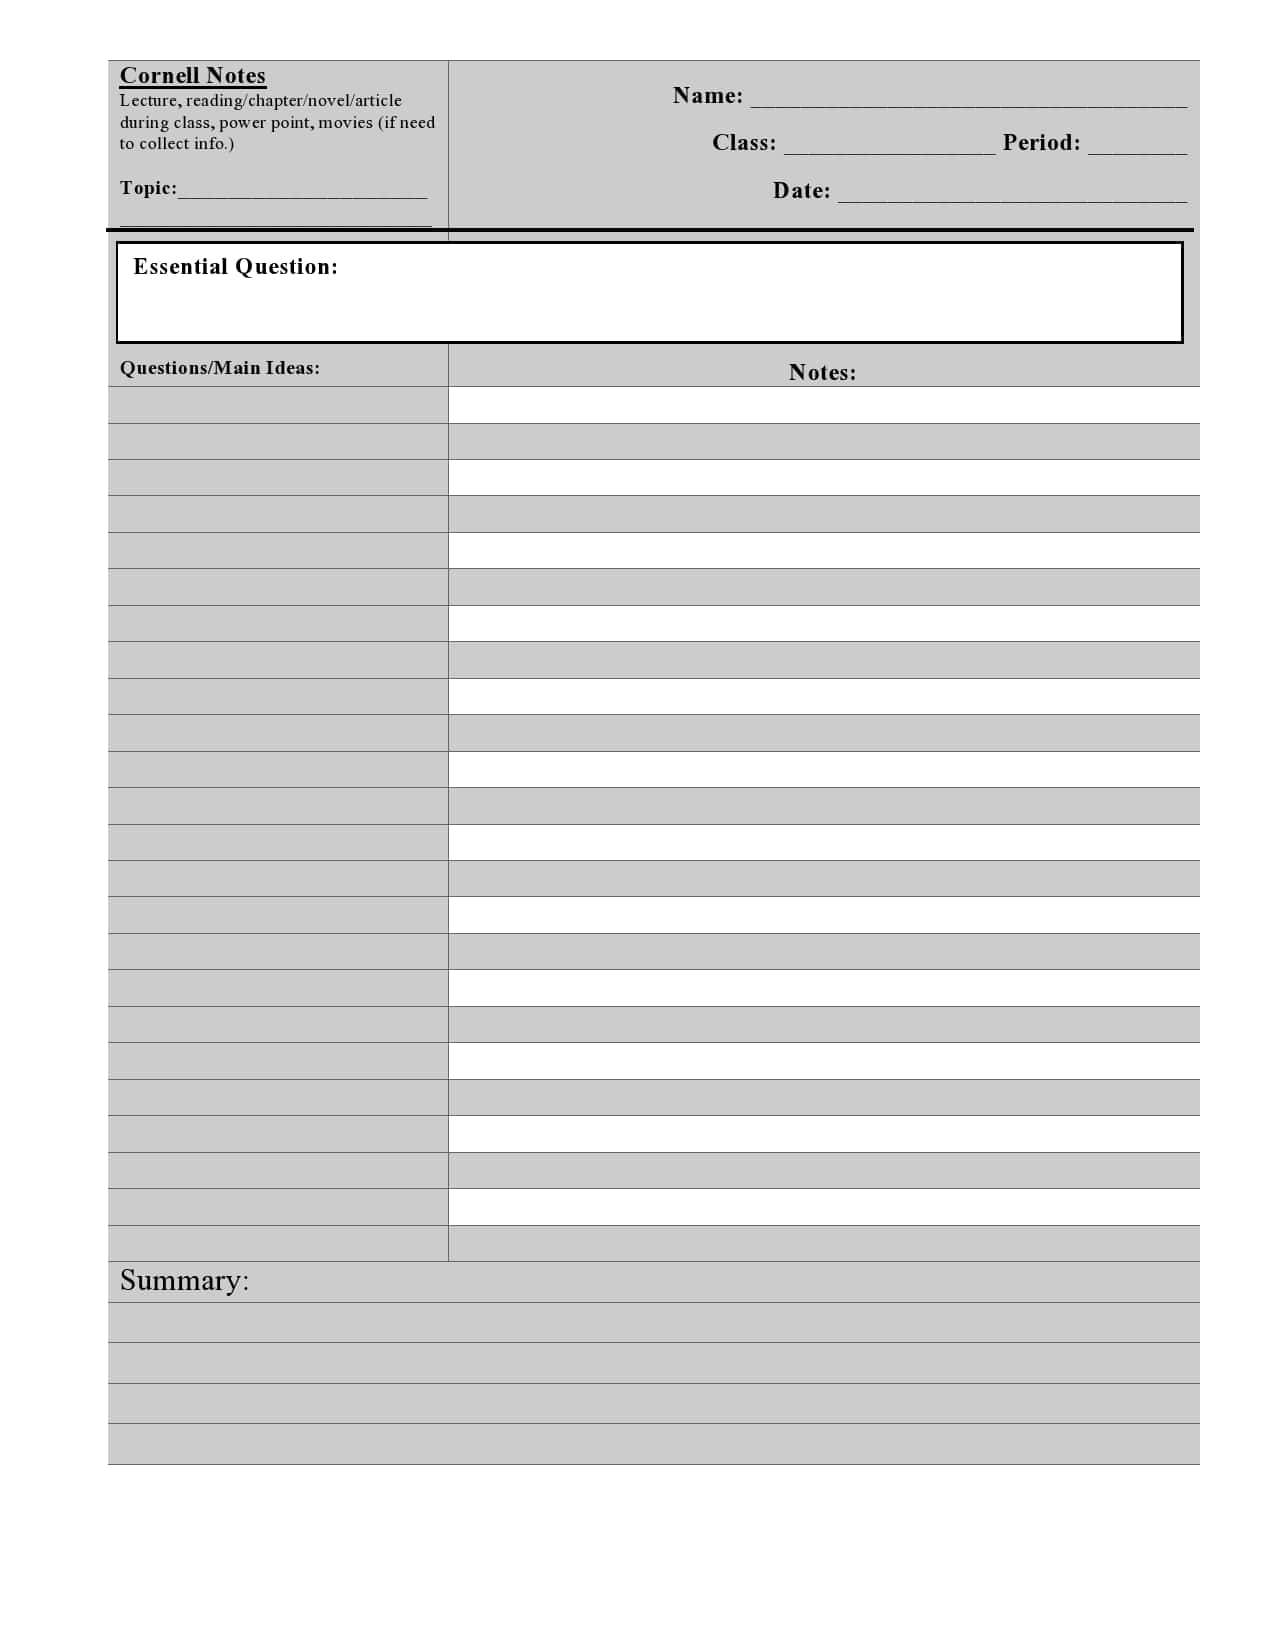 11 Printable Cornell Notes Templates [Free] - TemplateArchive With Cornell Note Template Word